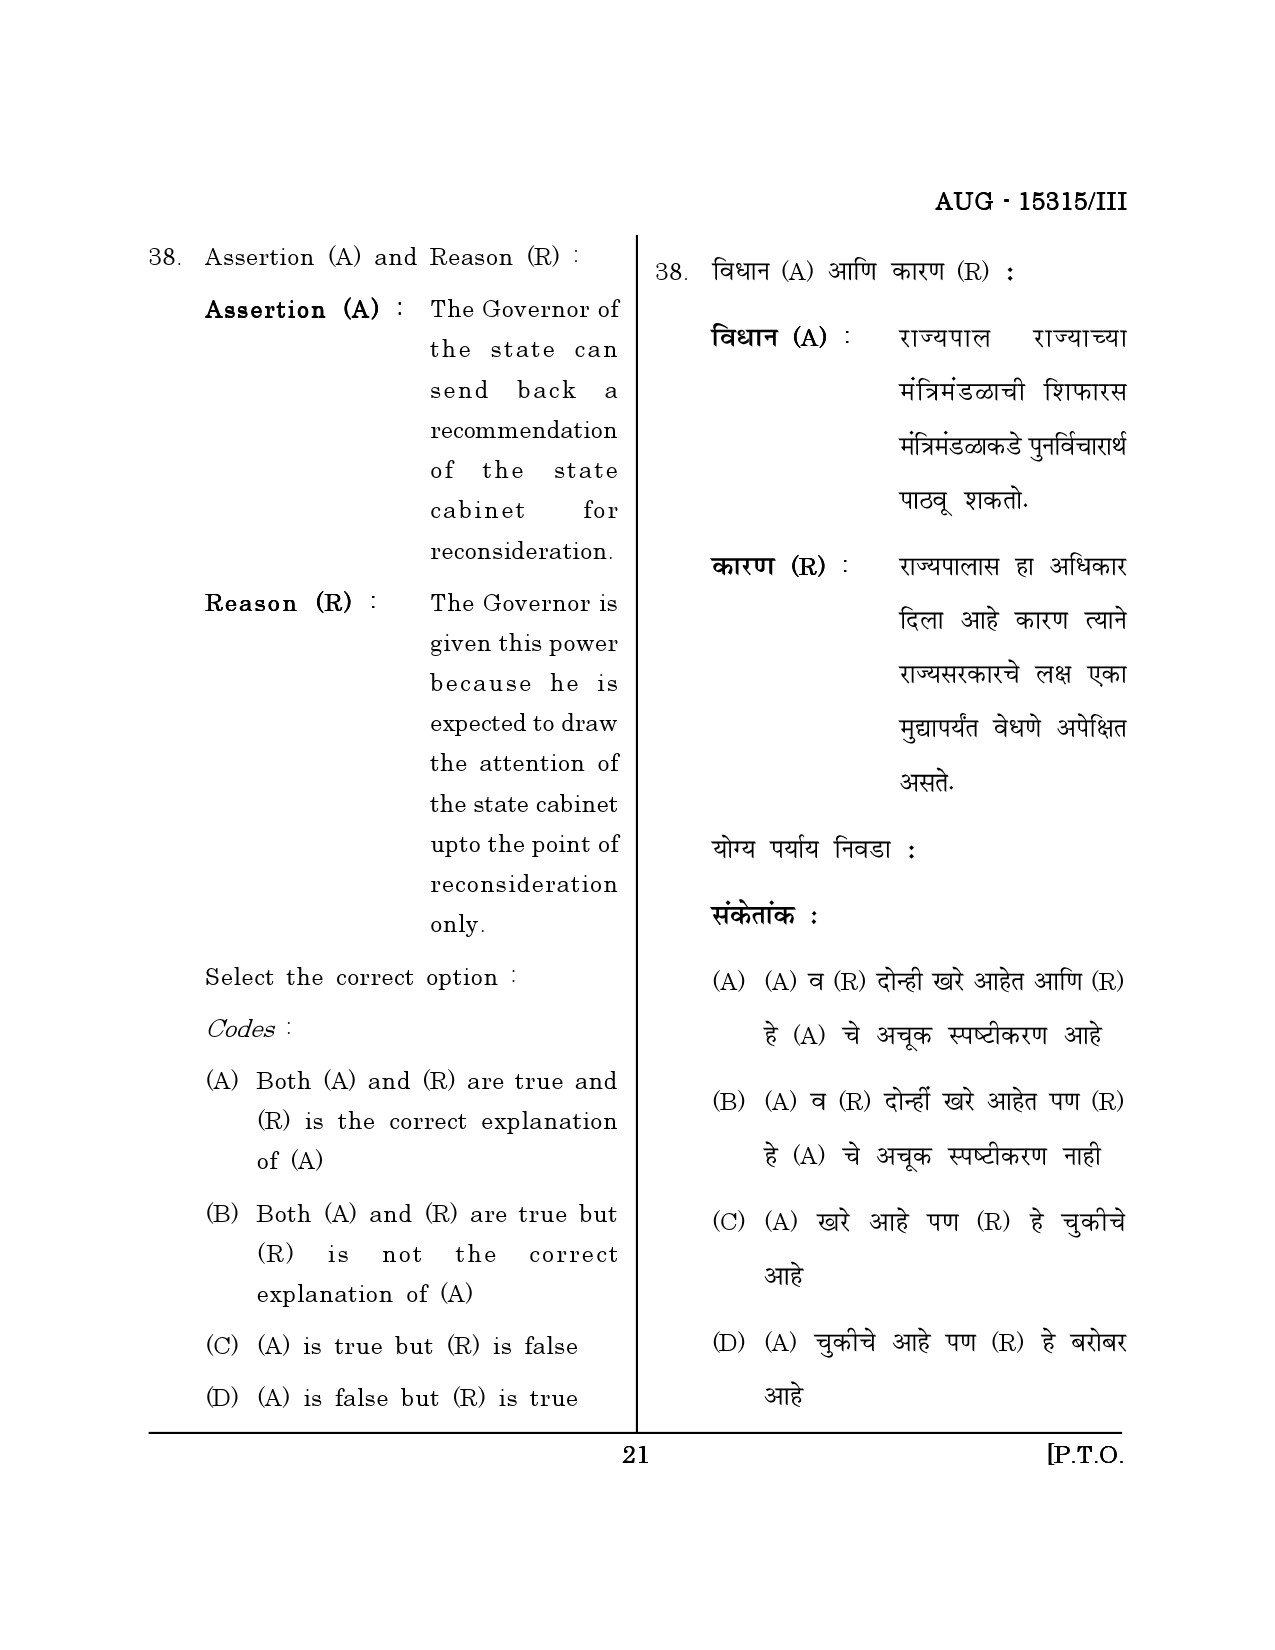 Maharashtra SET Political Science Question Paper III August 2015 20